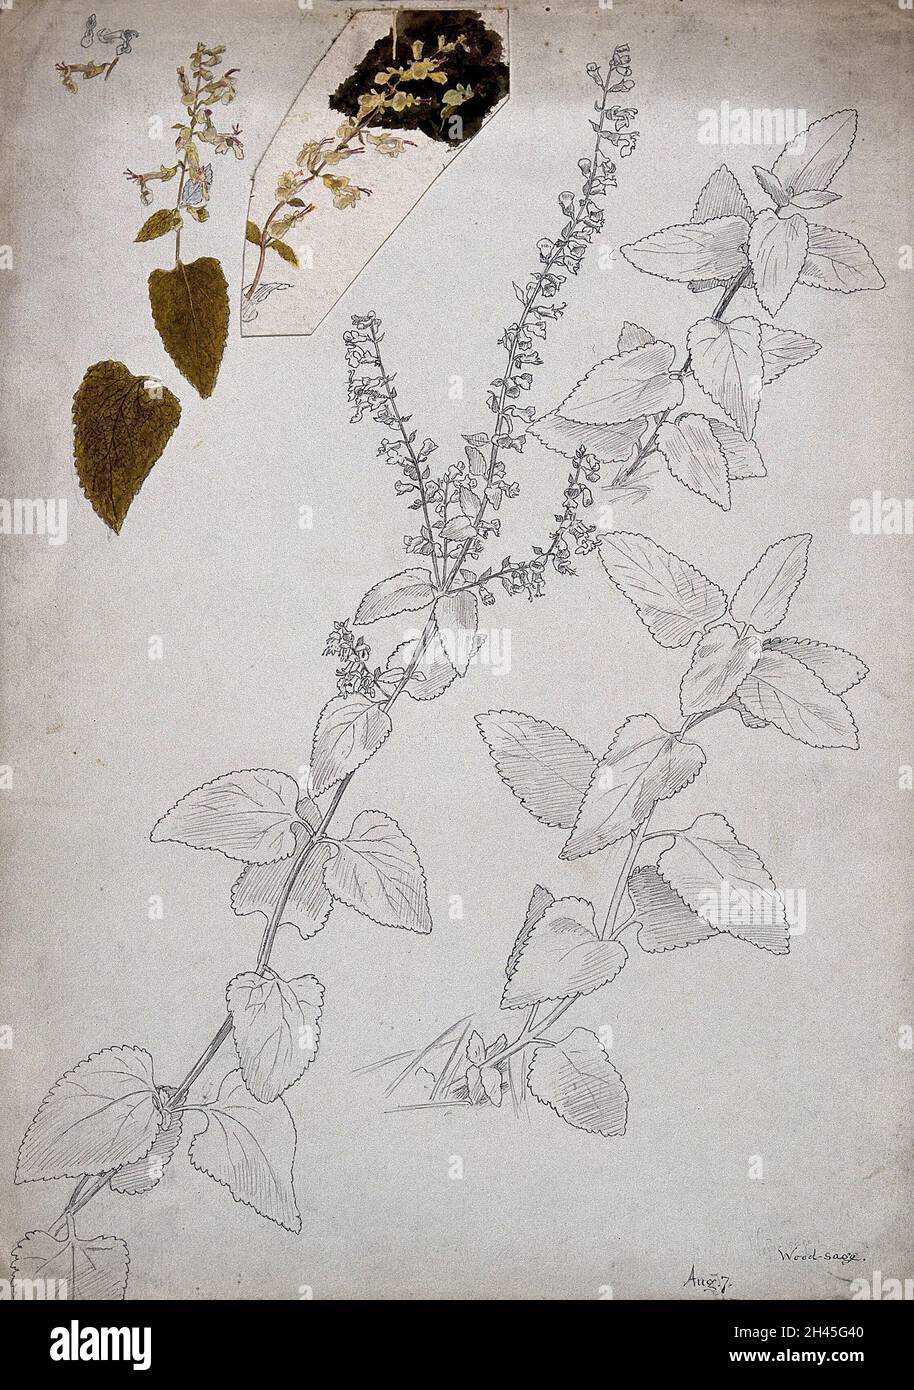 Wood sage (Teucrium scorodonia): flowering stems and floral segments. Pen and watercolour drawings. Stock Photo